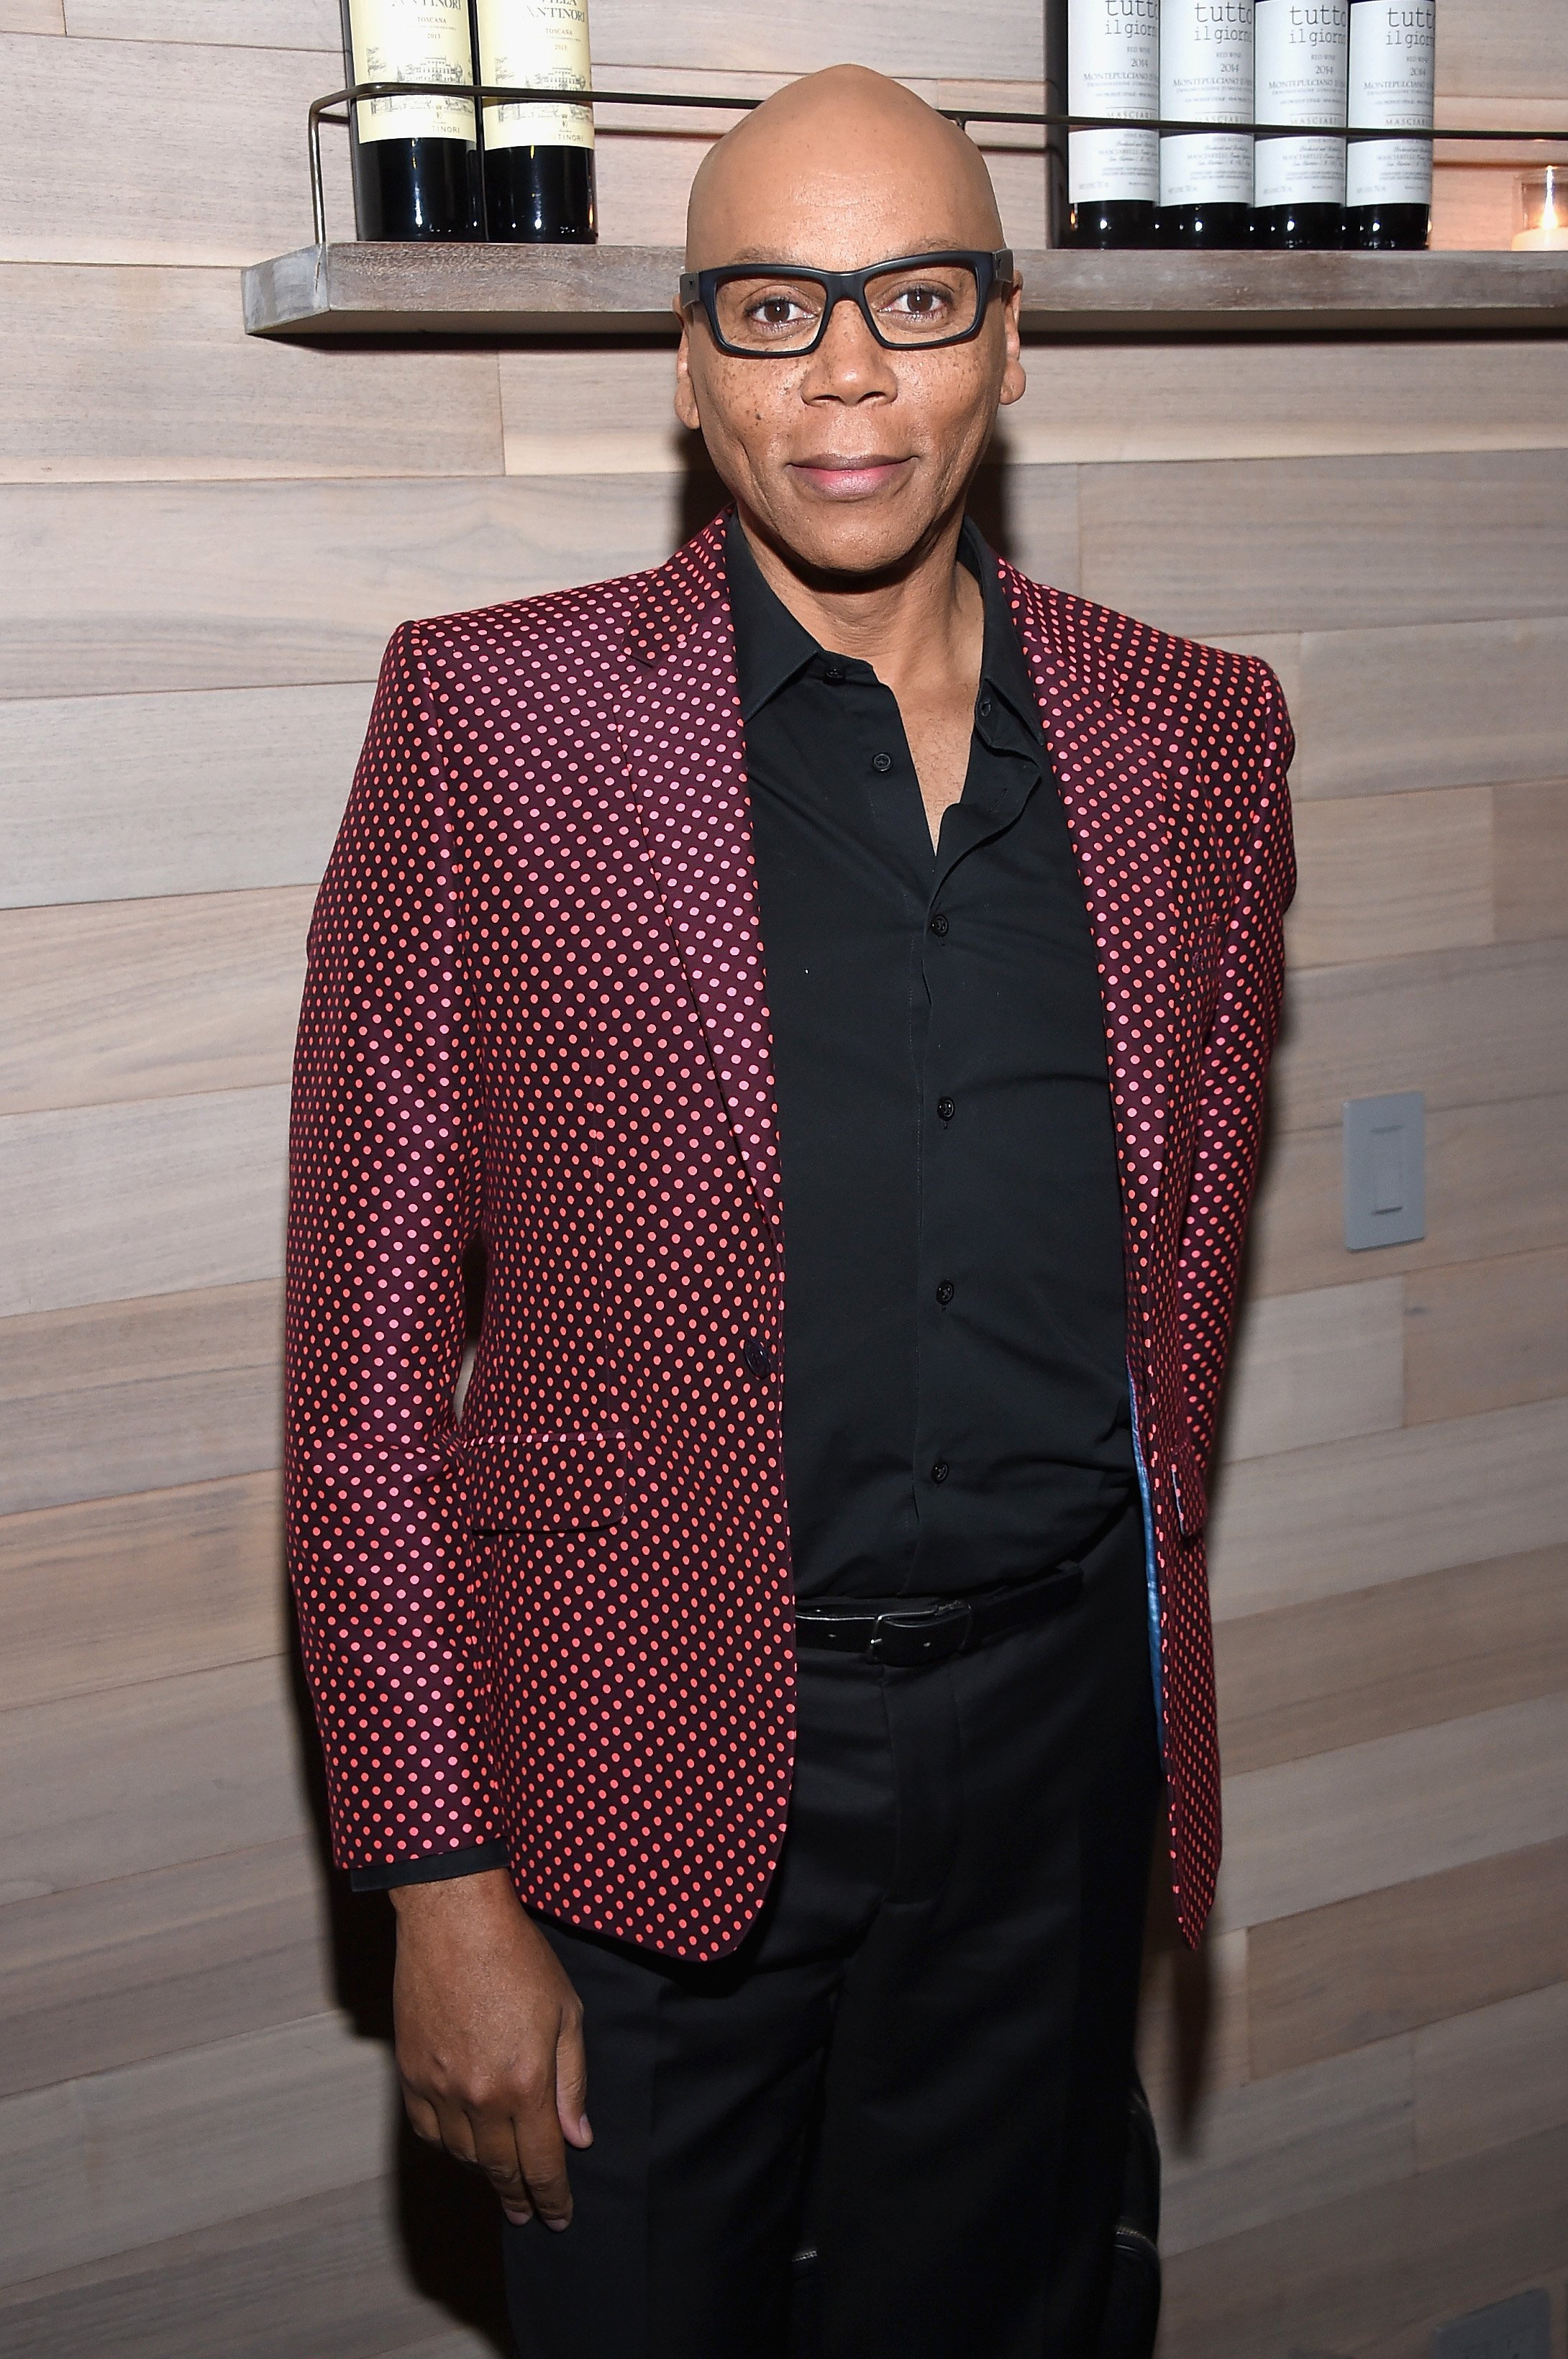 RuPaul attends The Season 2 Premiere Of "Shades Of Blue" after party, hosted by NBC And The Cinema Society at Tutto Il Giorno on March 1, 2017 | Photo: Getty Images